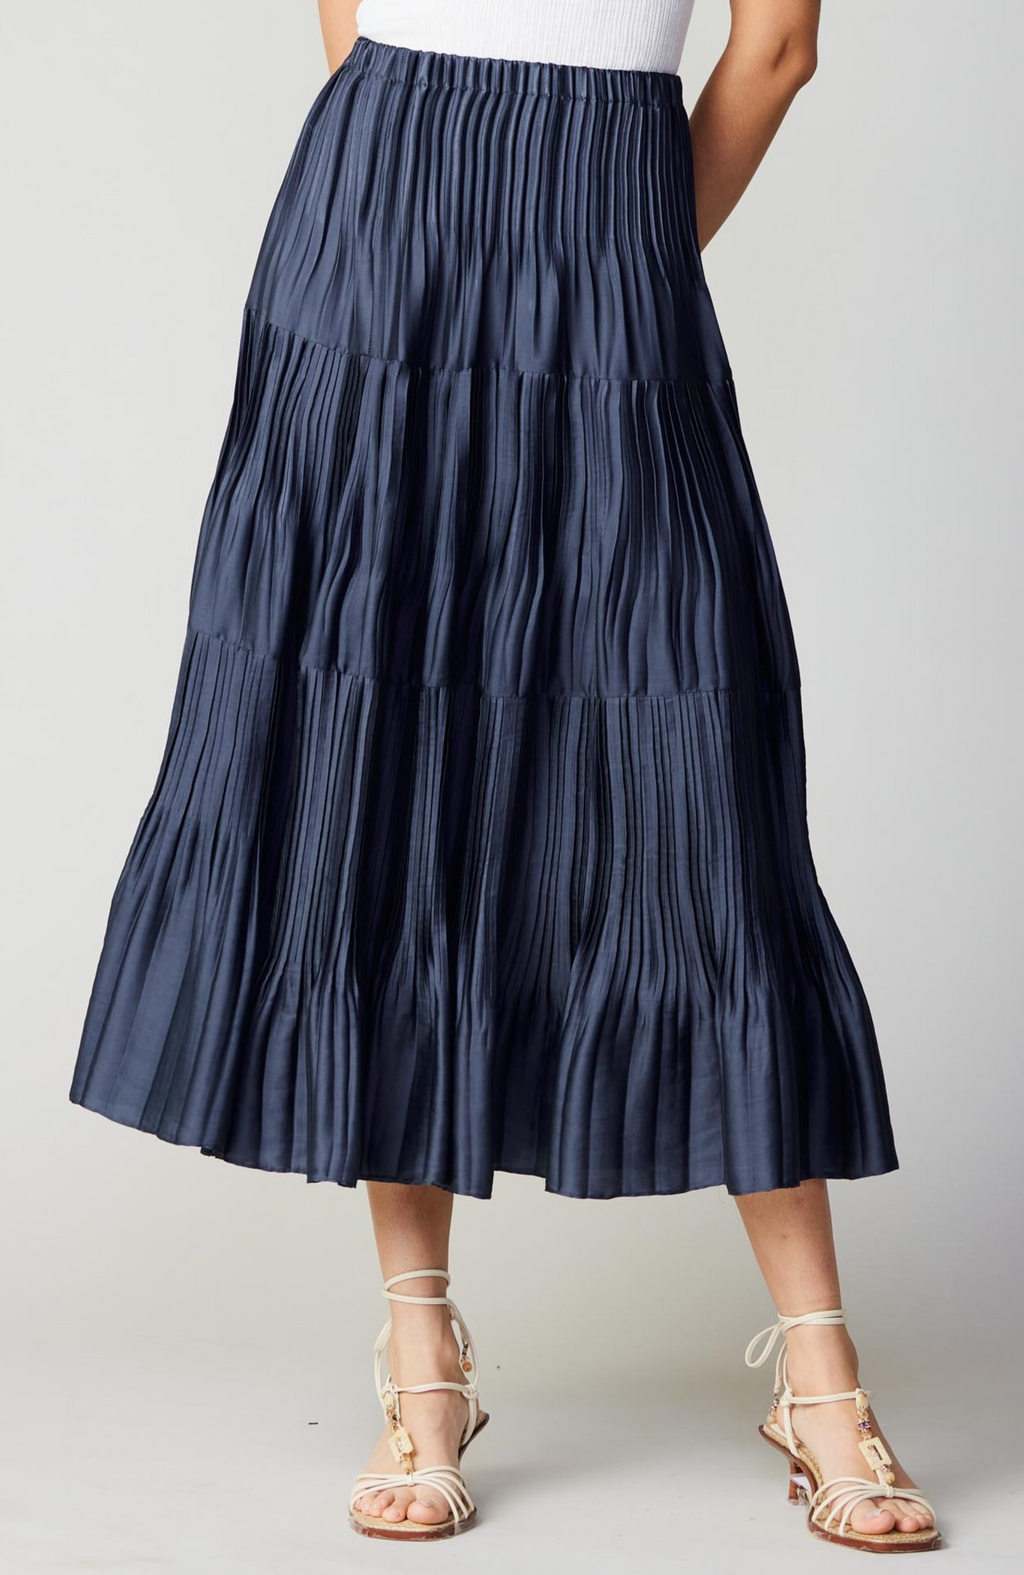 Current Air - Special Pleated Long Skirt